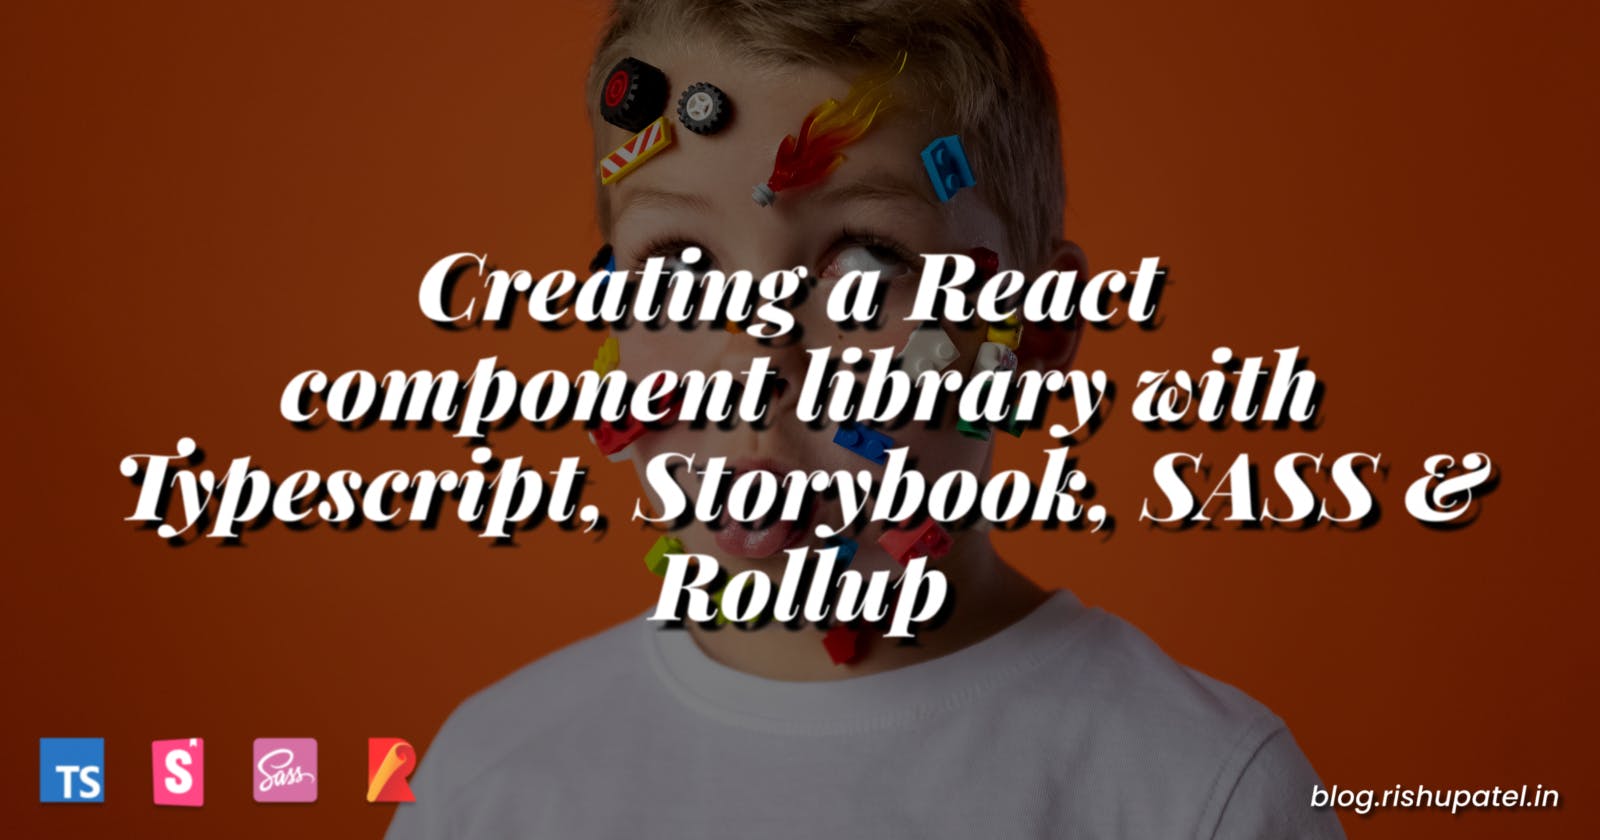 How to create a react component library using Storybook, TypeScript, SCSS, and Rollup?